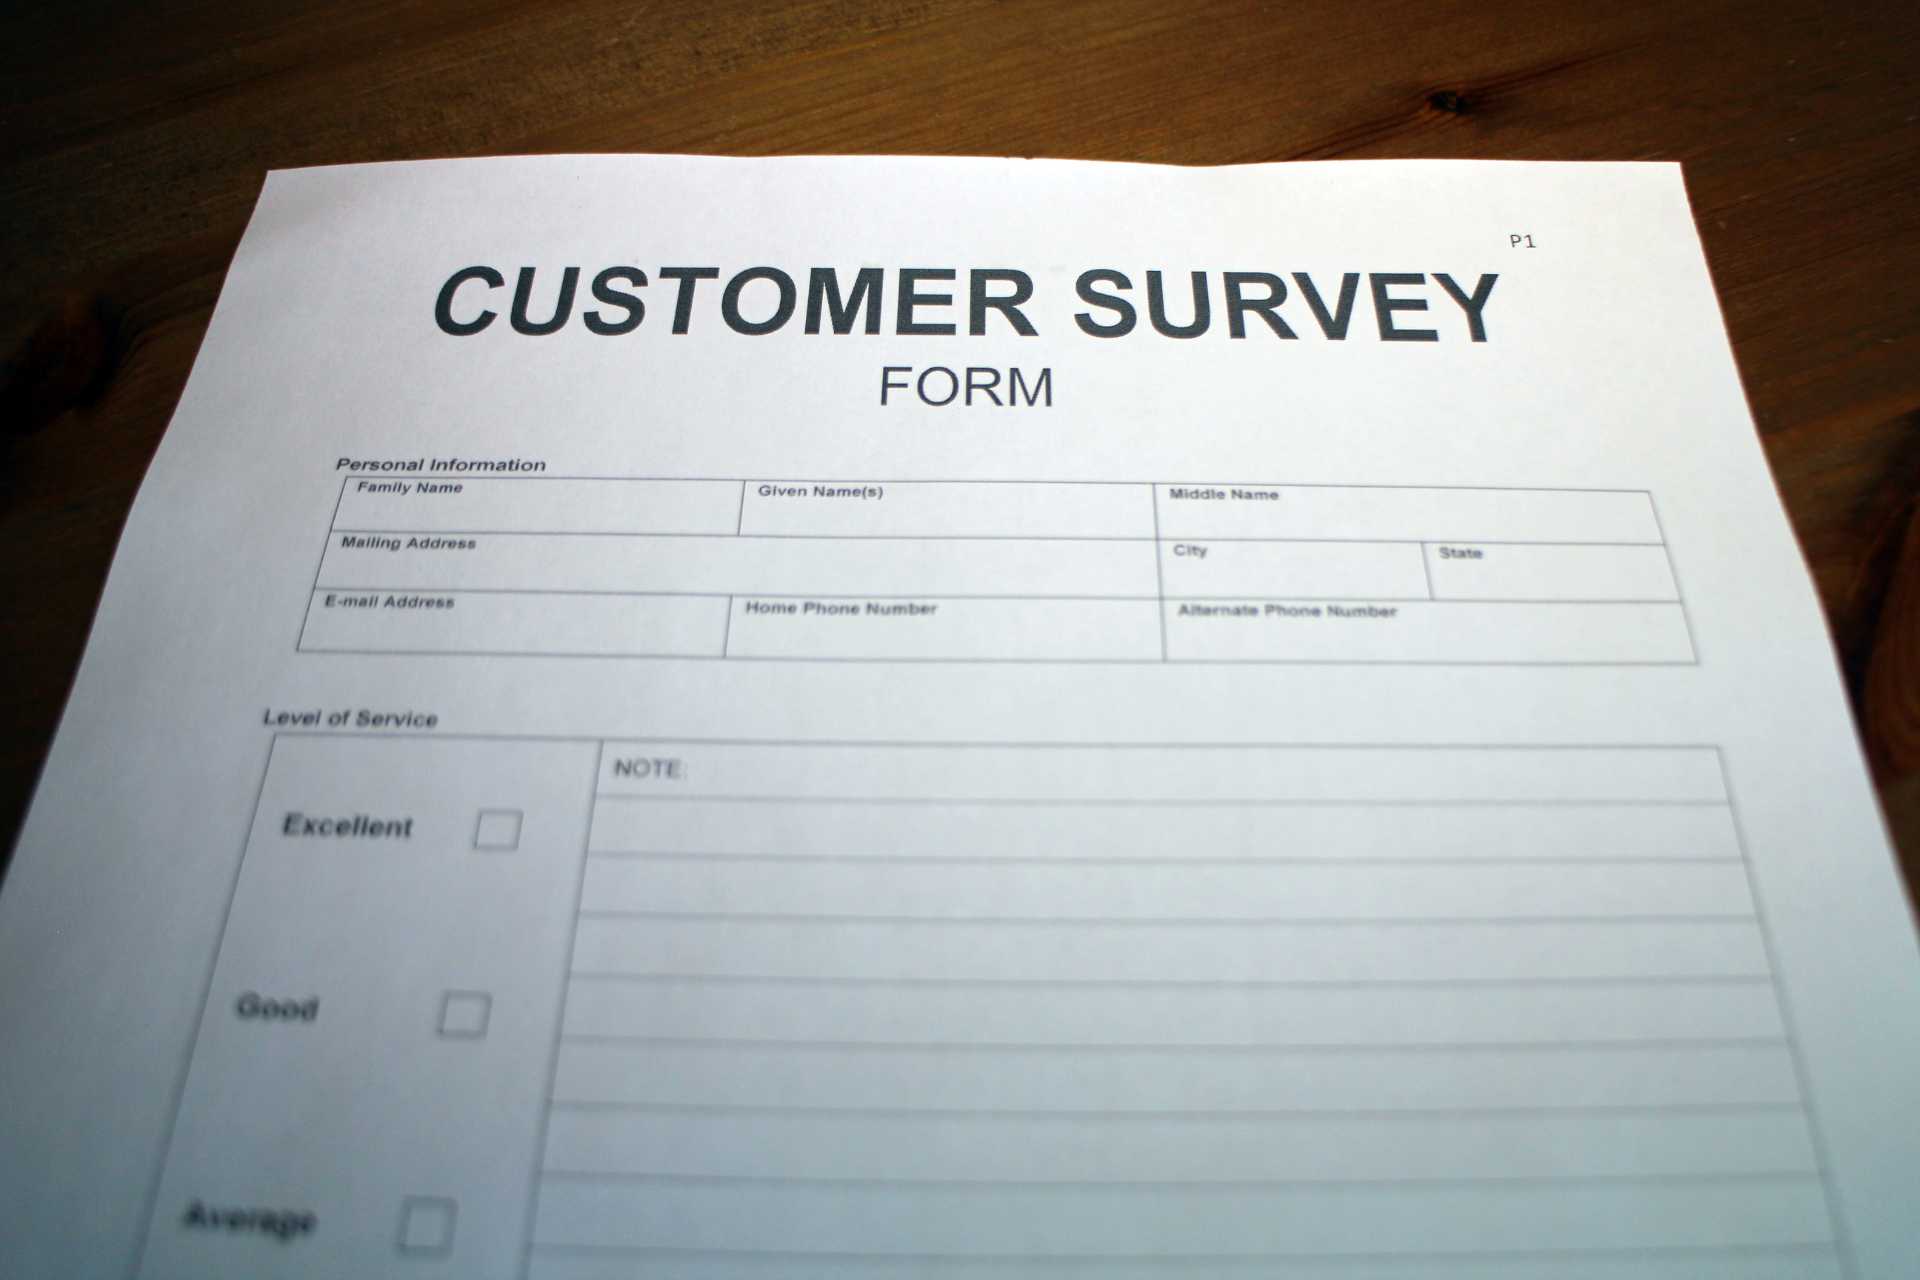 A customer survey form titled 'CUSTOMER SURVEY FORM' awaits feedback on a wooden table, with sections for personal information and service level assessment ranging from 'Excellent' to 'Poor', a tool for measuring guest satisfaction that can influence negative hotel reviews.